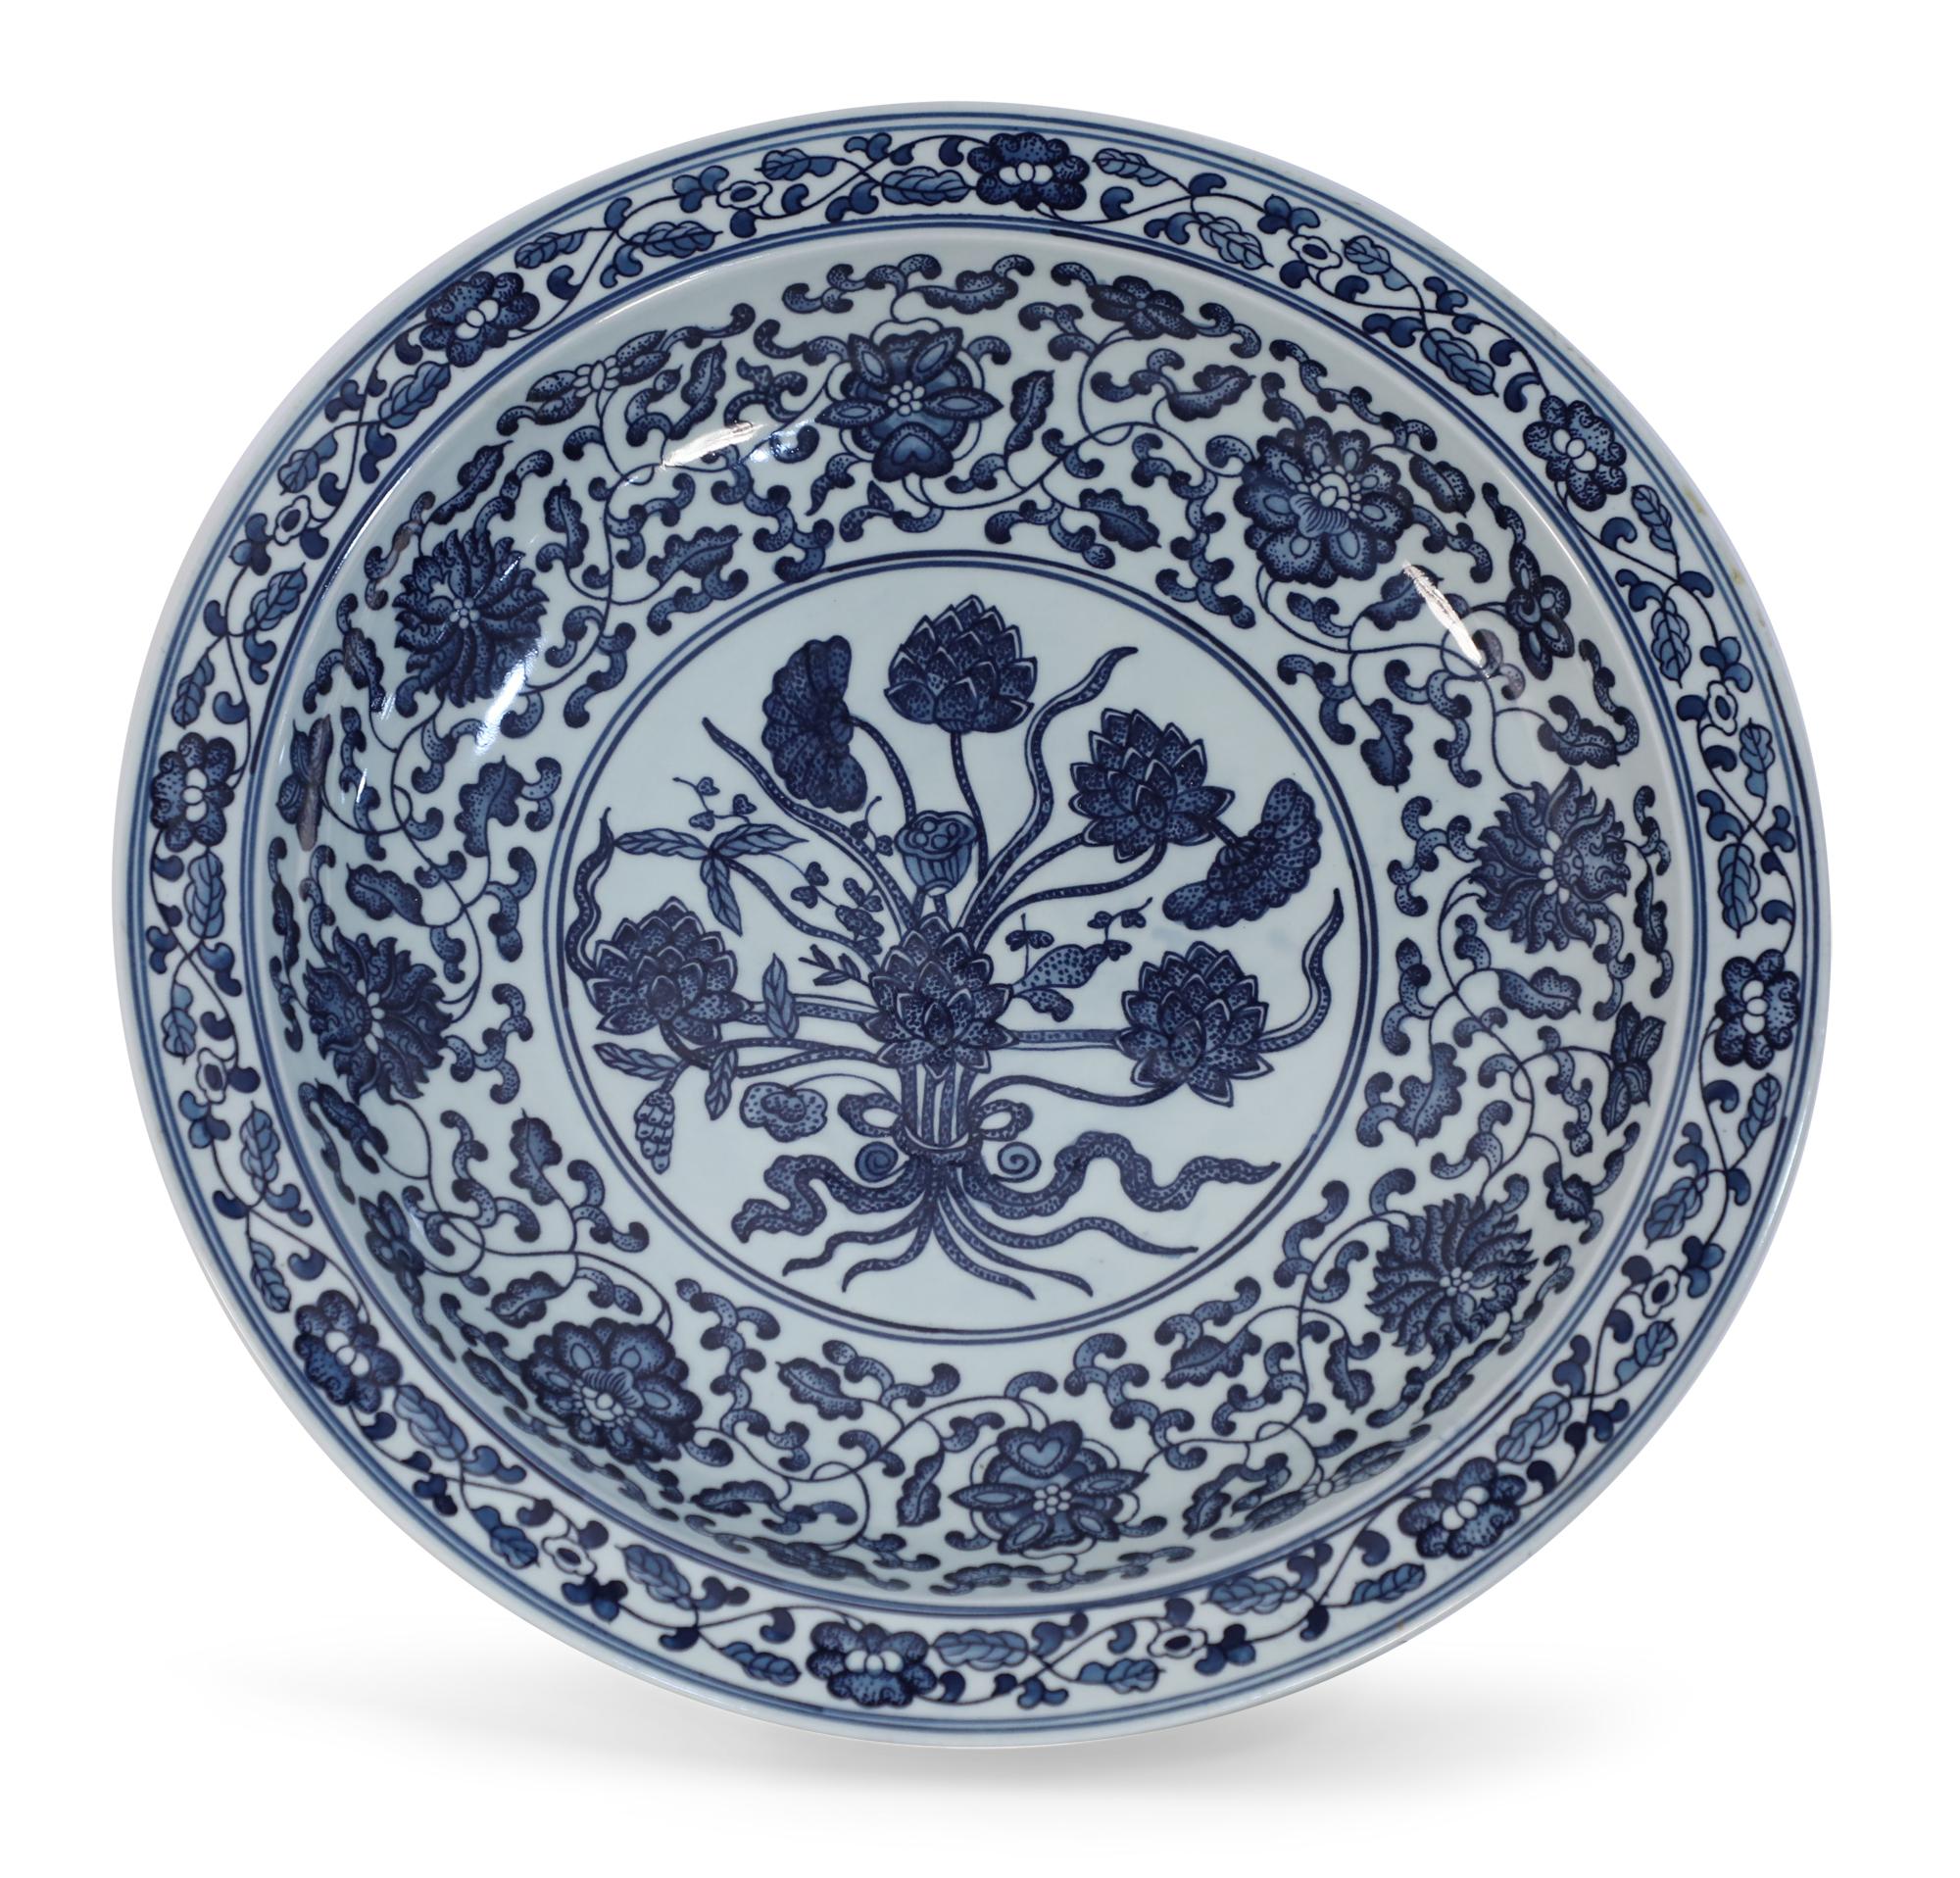 Pair of Chinese blue and white porcelain decorative plate painted with thin blue double lines surrounding a floral garland along the rim, opening to a wider floral and swirling vine motif on the interior that surrounds a central floral bouquet, and